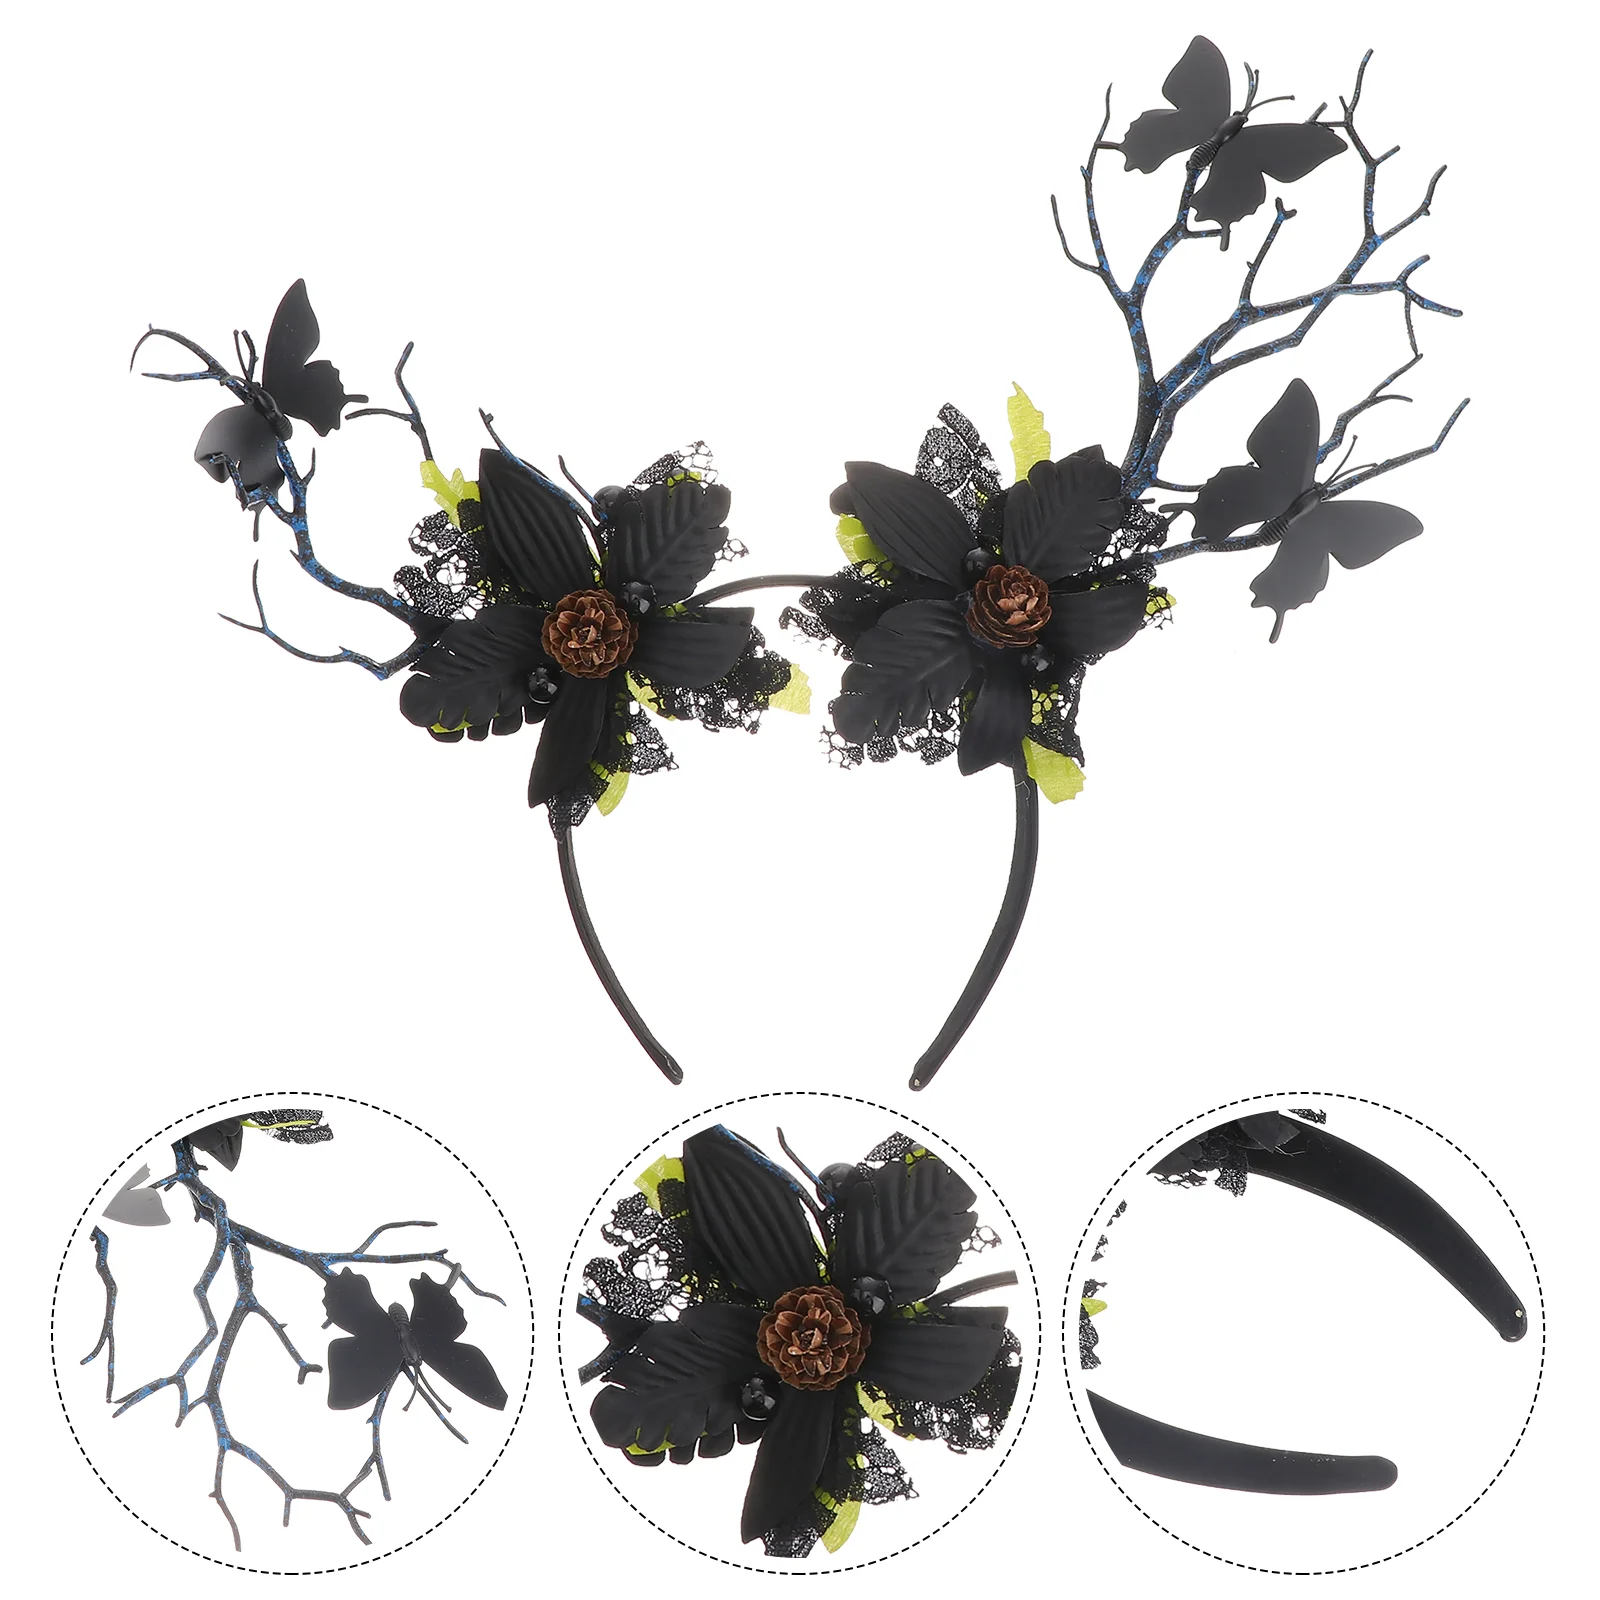 

Headband Dance Party Hairband Floral Crown Headpiece Antlers Accessory Christmas Deer Adornment Halloween Costumes Adults